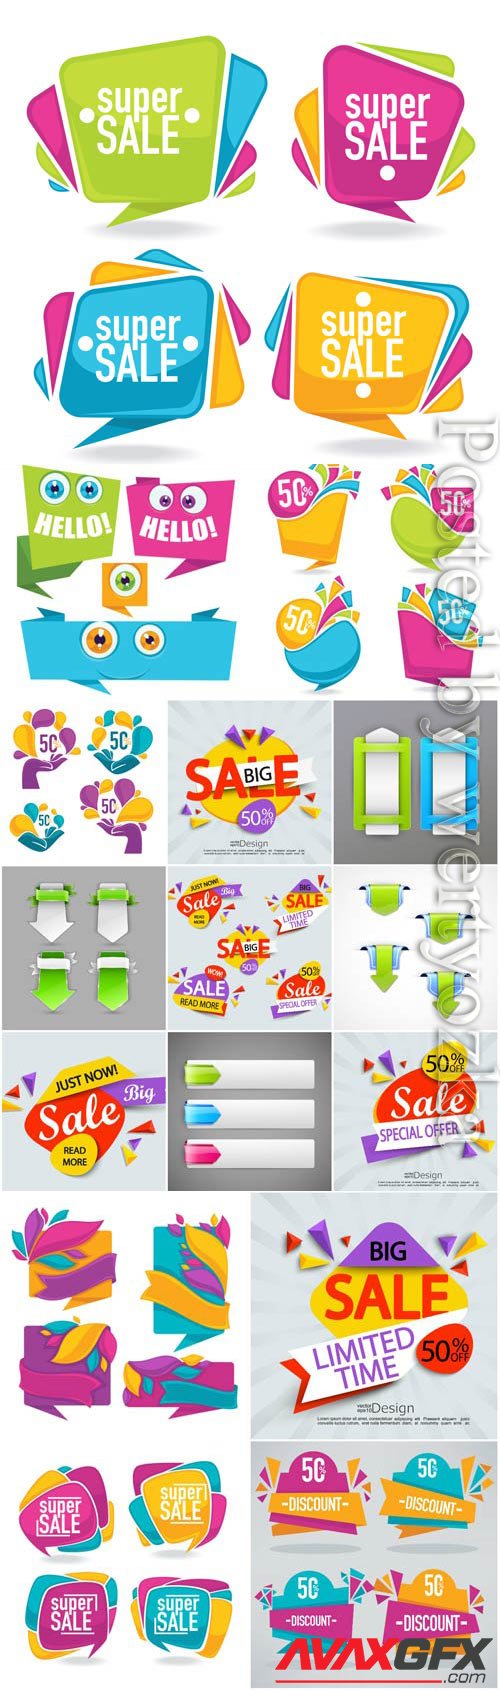 Discount color banners in vector